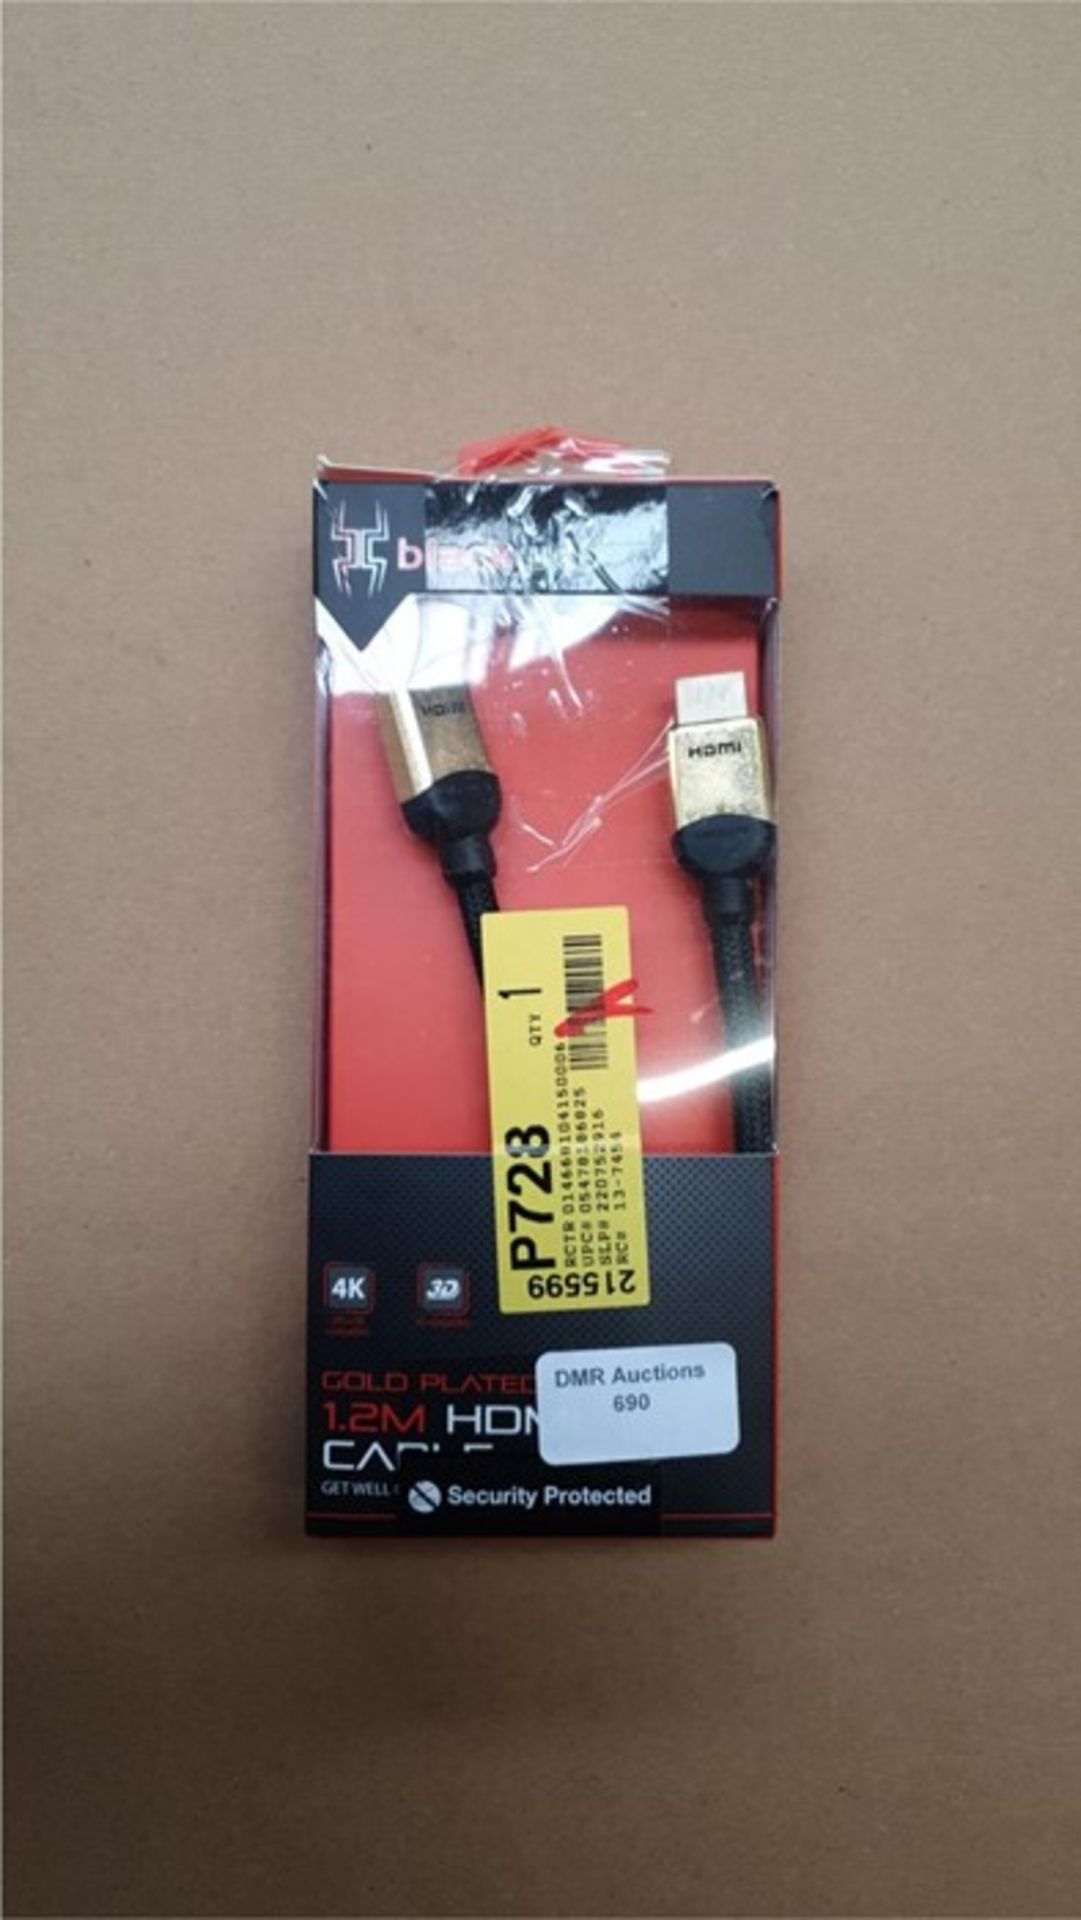 1 BOXED BLACK WEB 1.2M GOLD PLATED HDMI CABLE, FOR 4K AND 3D / BL-5599 / RRP £18.00 (VIEWING